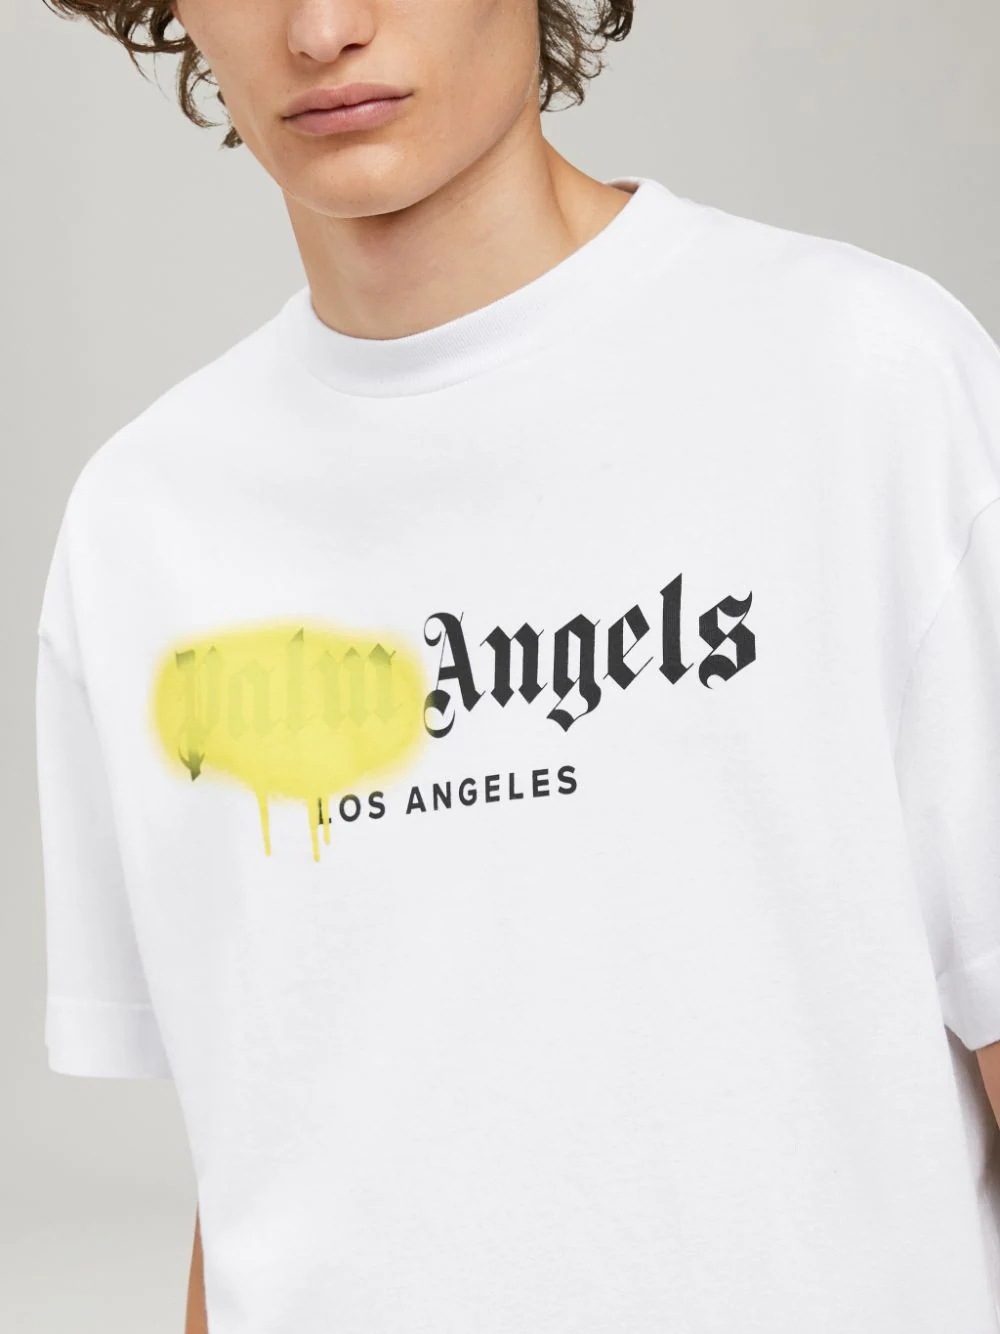 Palm Angels Los Angeles Sprayed Logo Tee White | Hype Vault Kuala Lumpur | Asia's Top Trusted High-End Sneakers and Streetwear Store